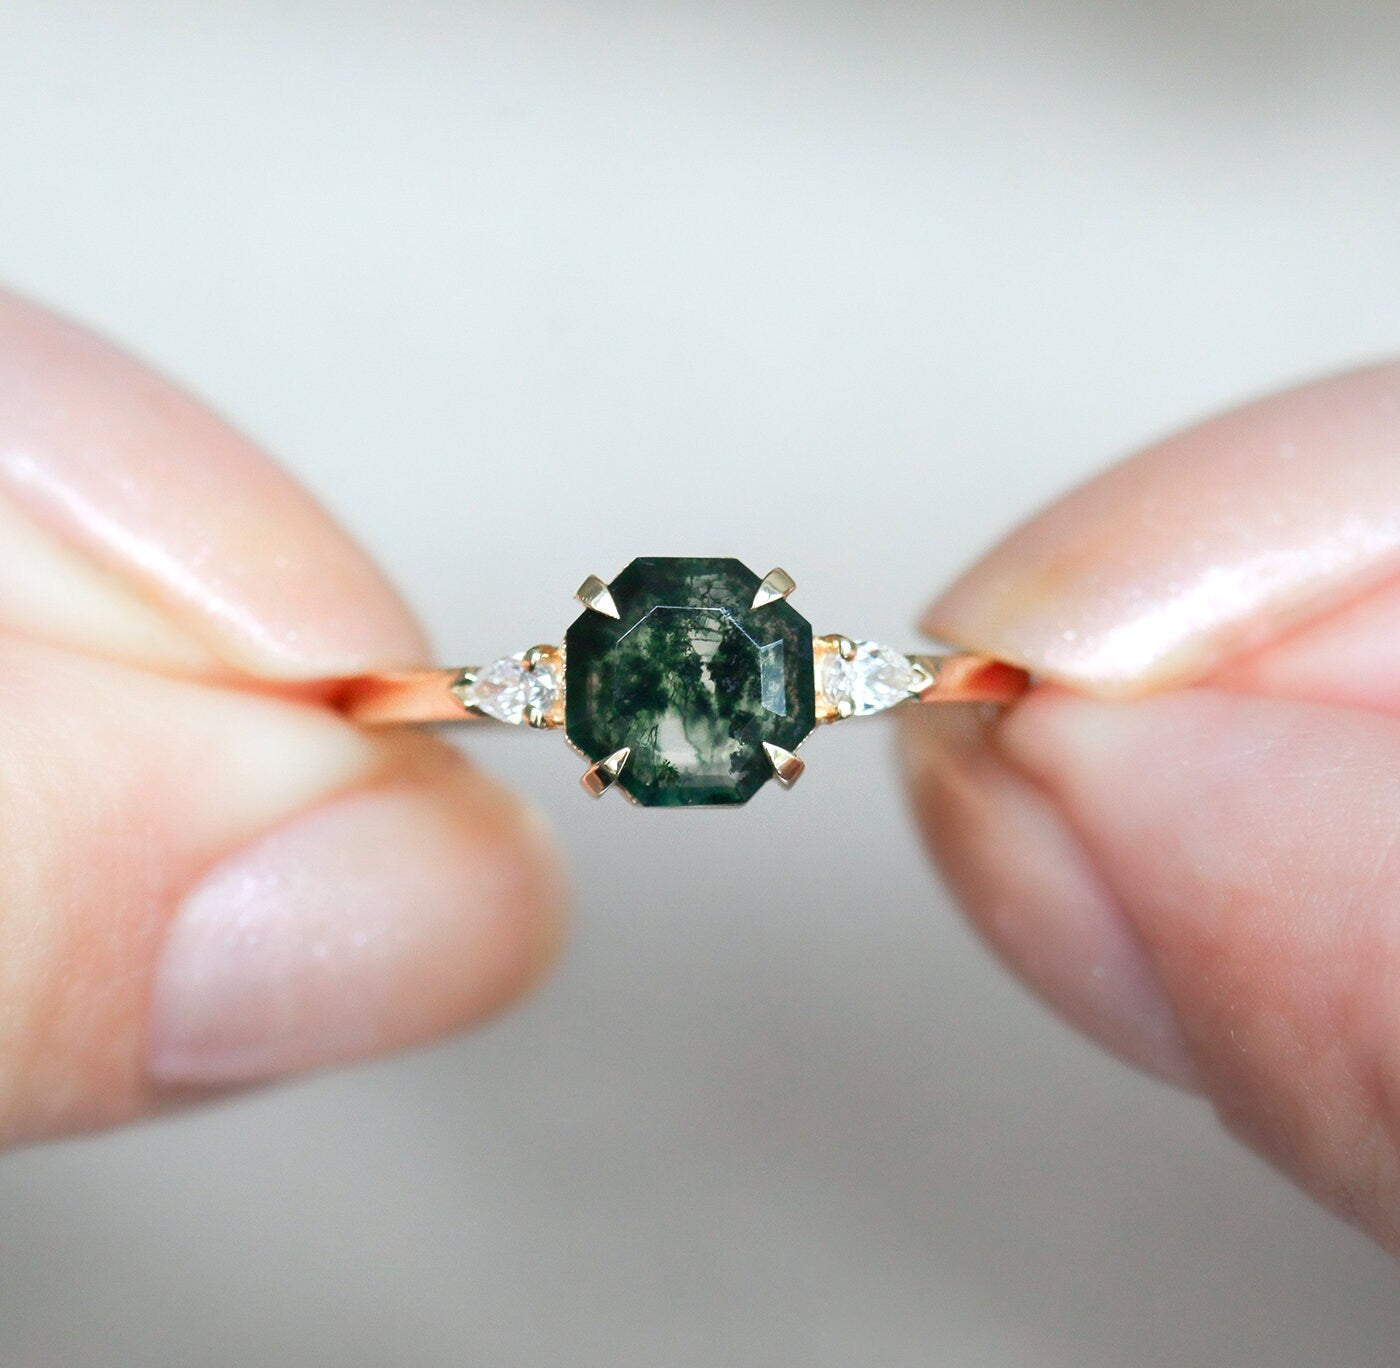 Octagon Moss Agate Ring With 2 Accent White Pear-Cut Diamonds